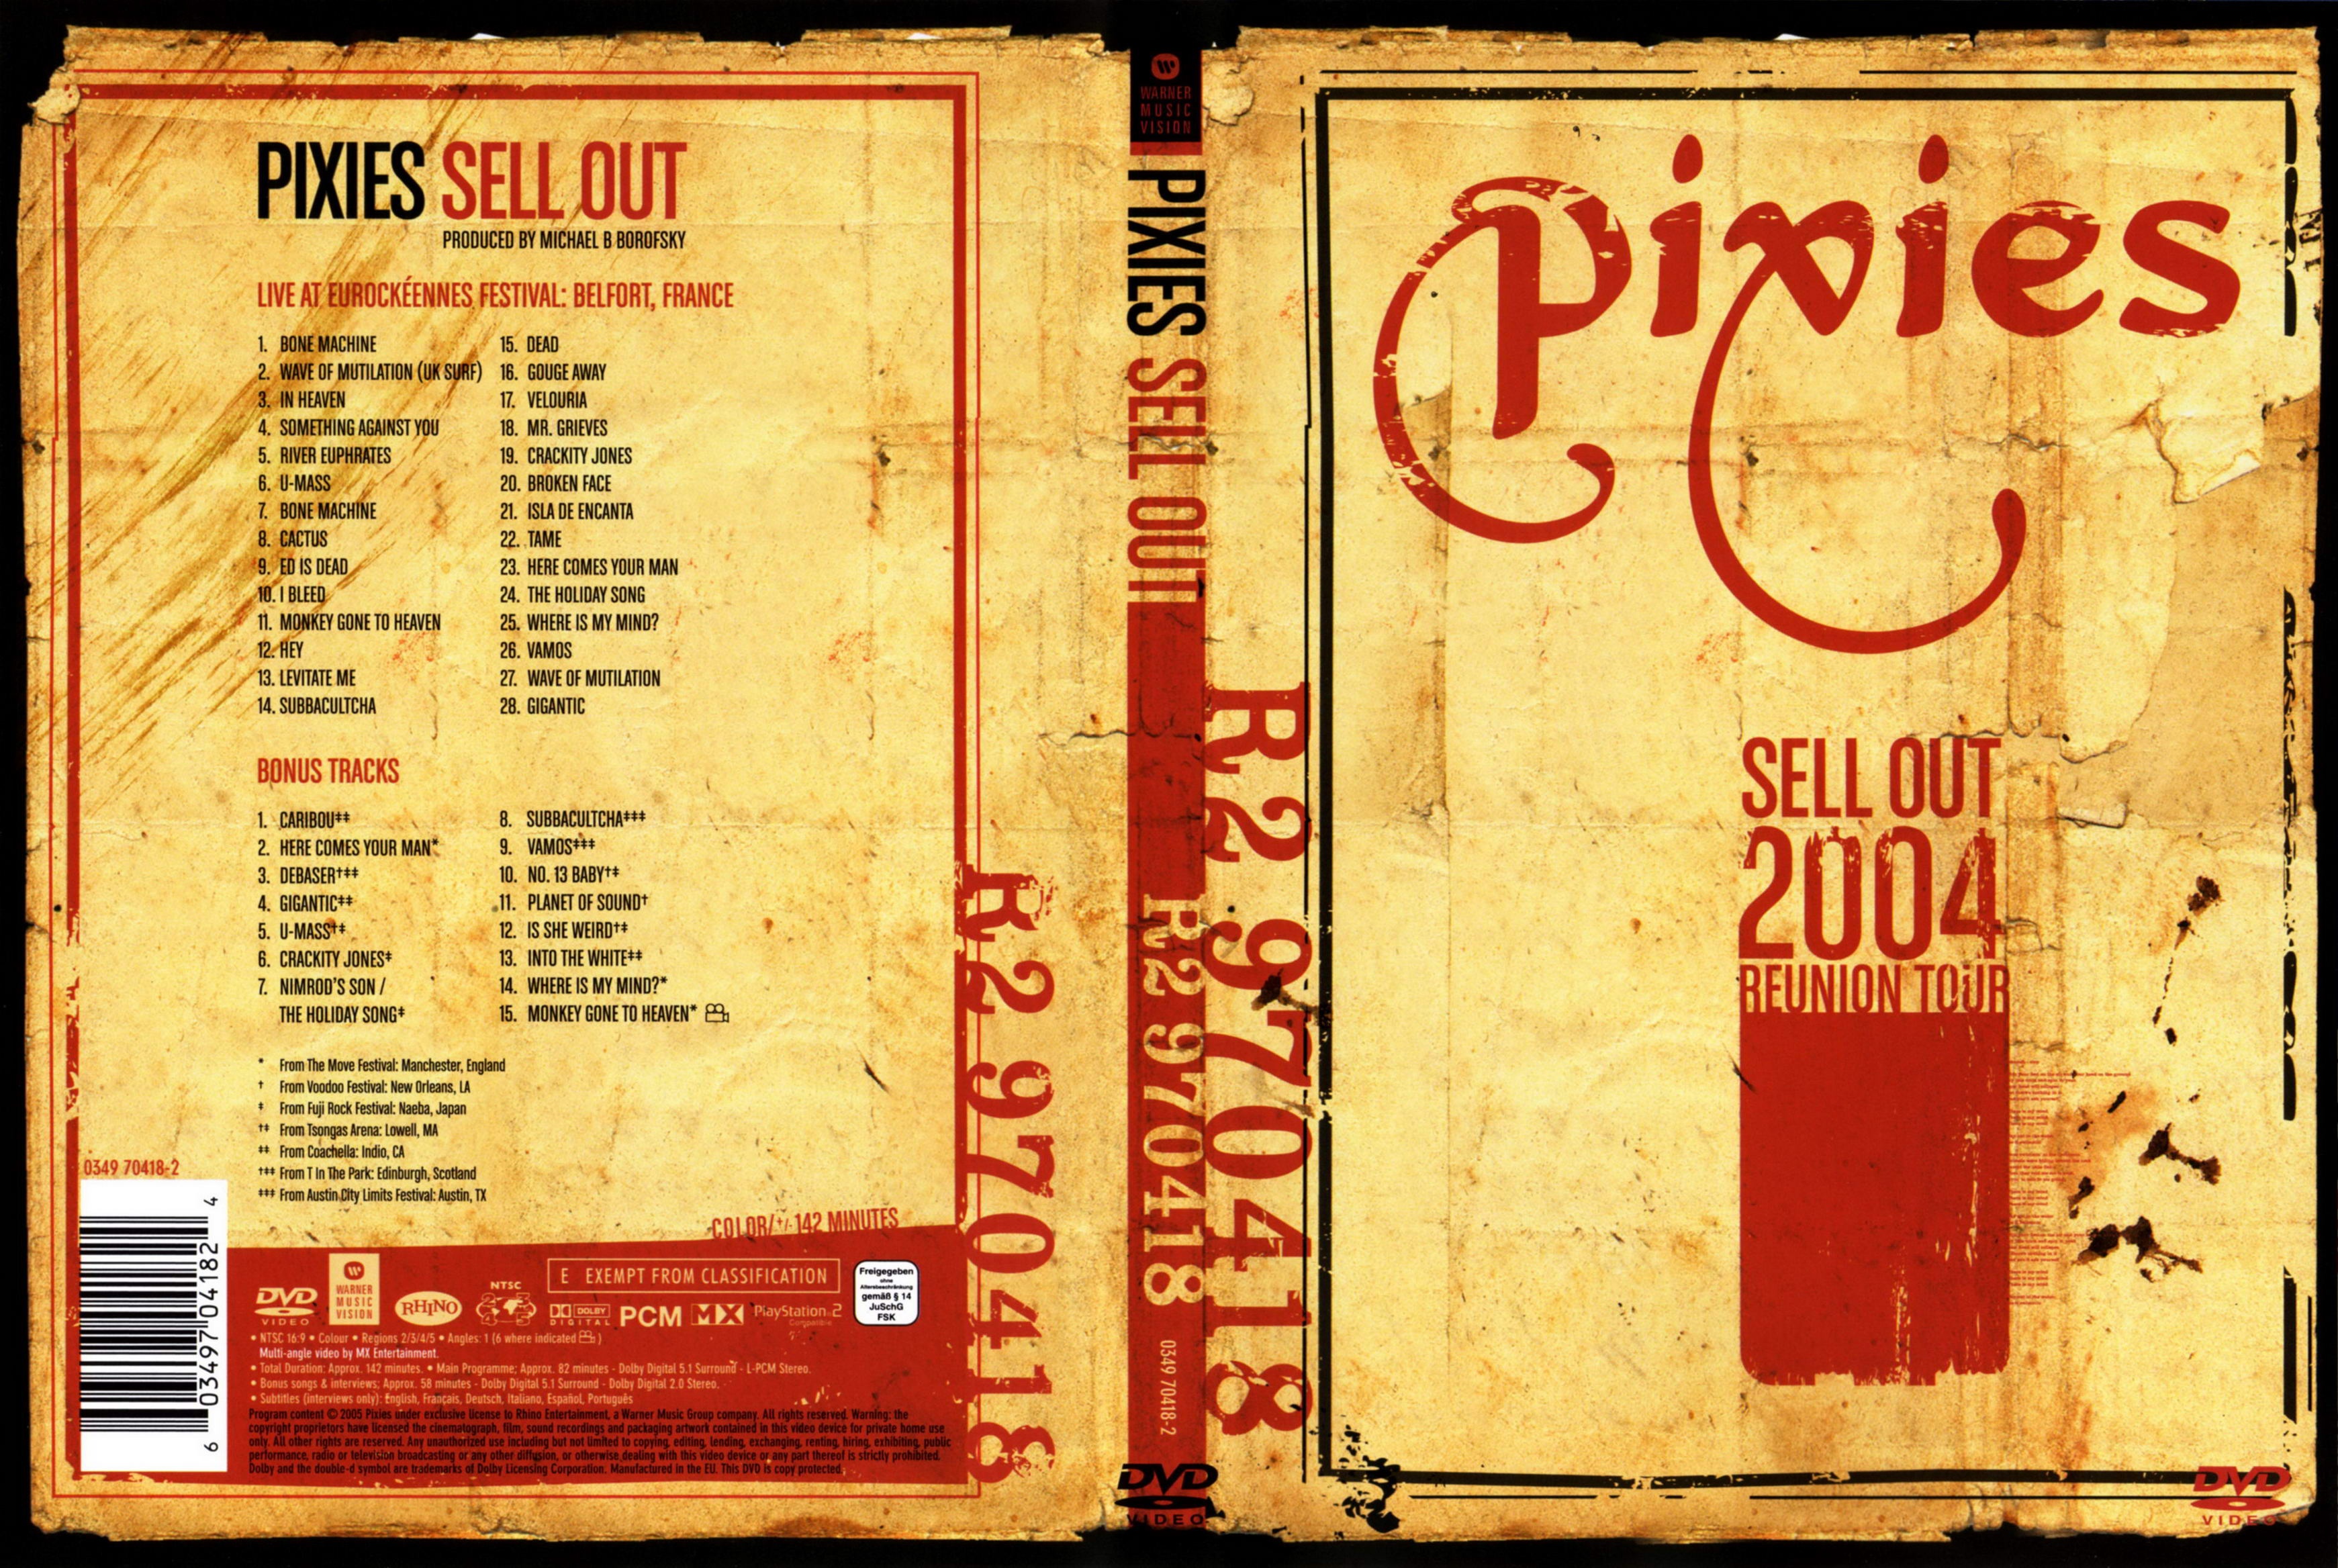 Jaquette DVD Pixies Sell out 2004